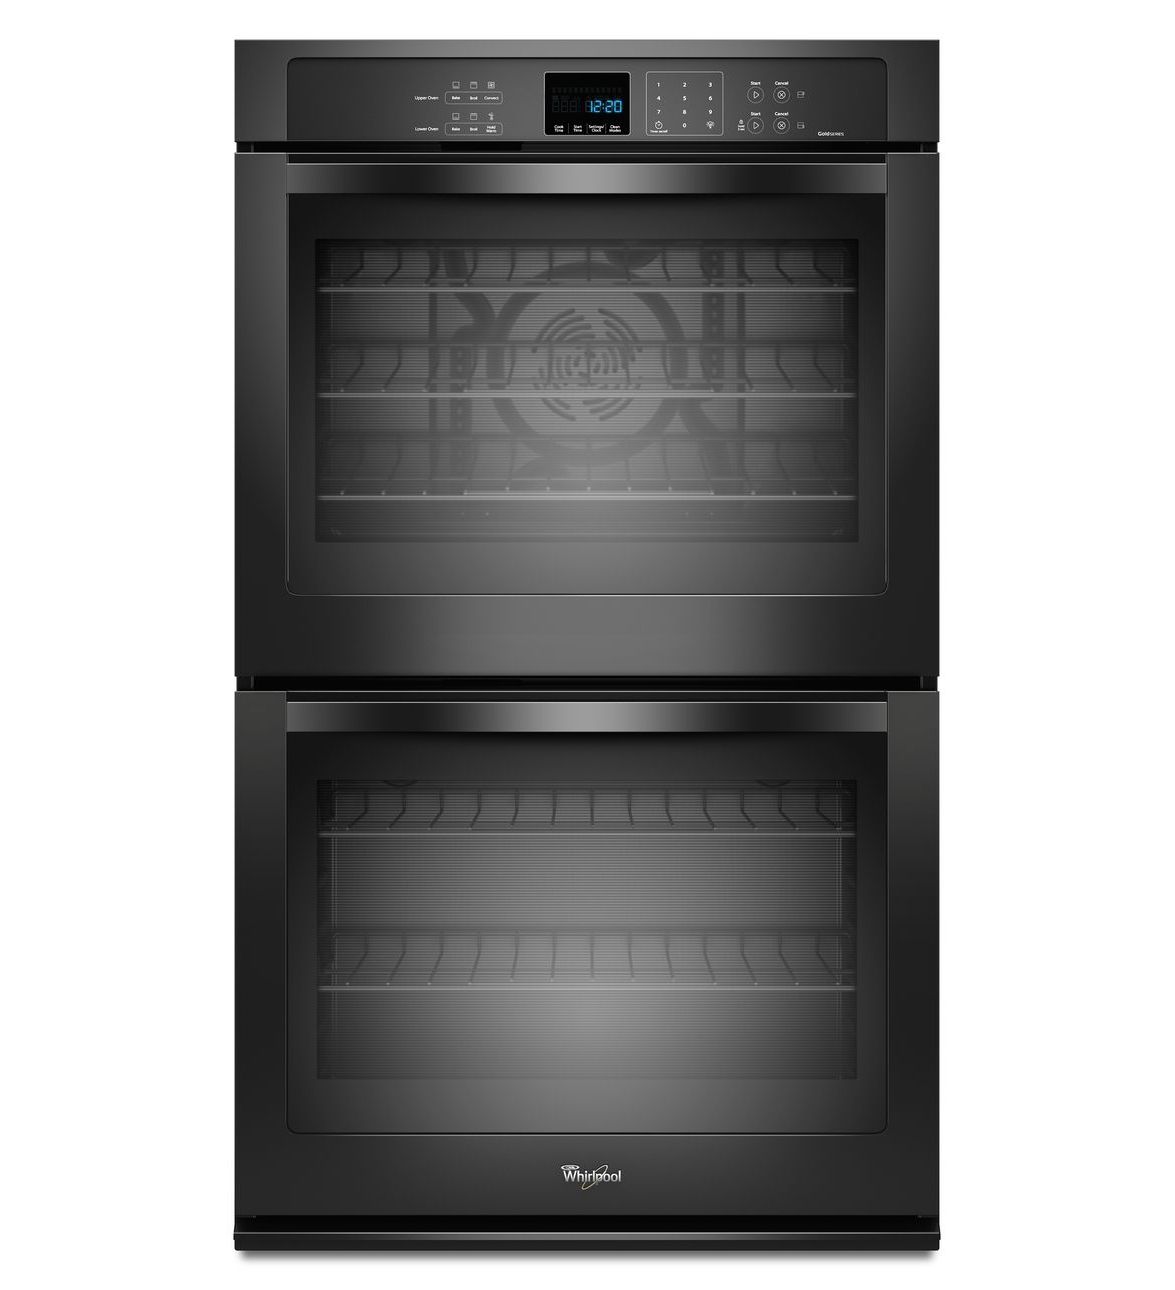 Whirlpool Gold® 10 cu. ft. Double Wall Oven with the True Convection Cooking WOD93EC0AB 